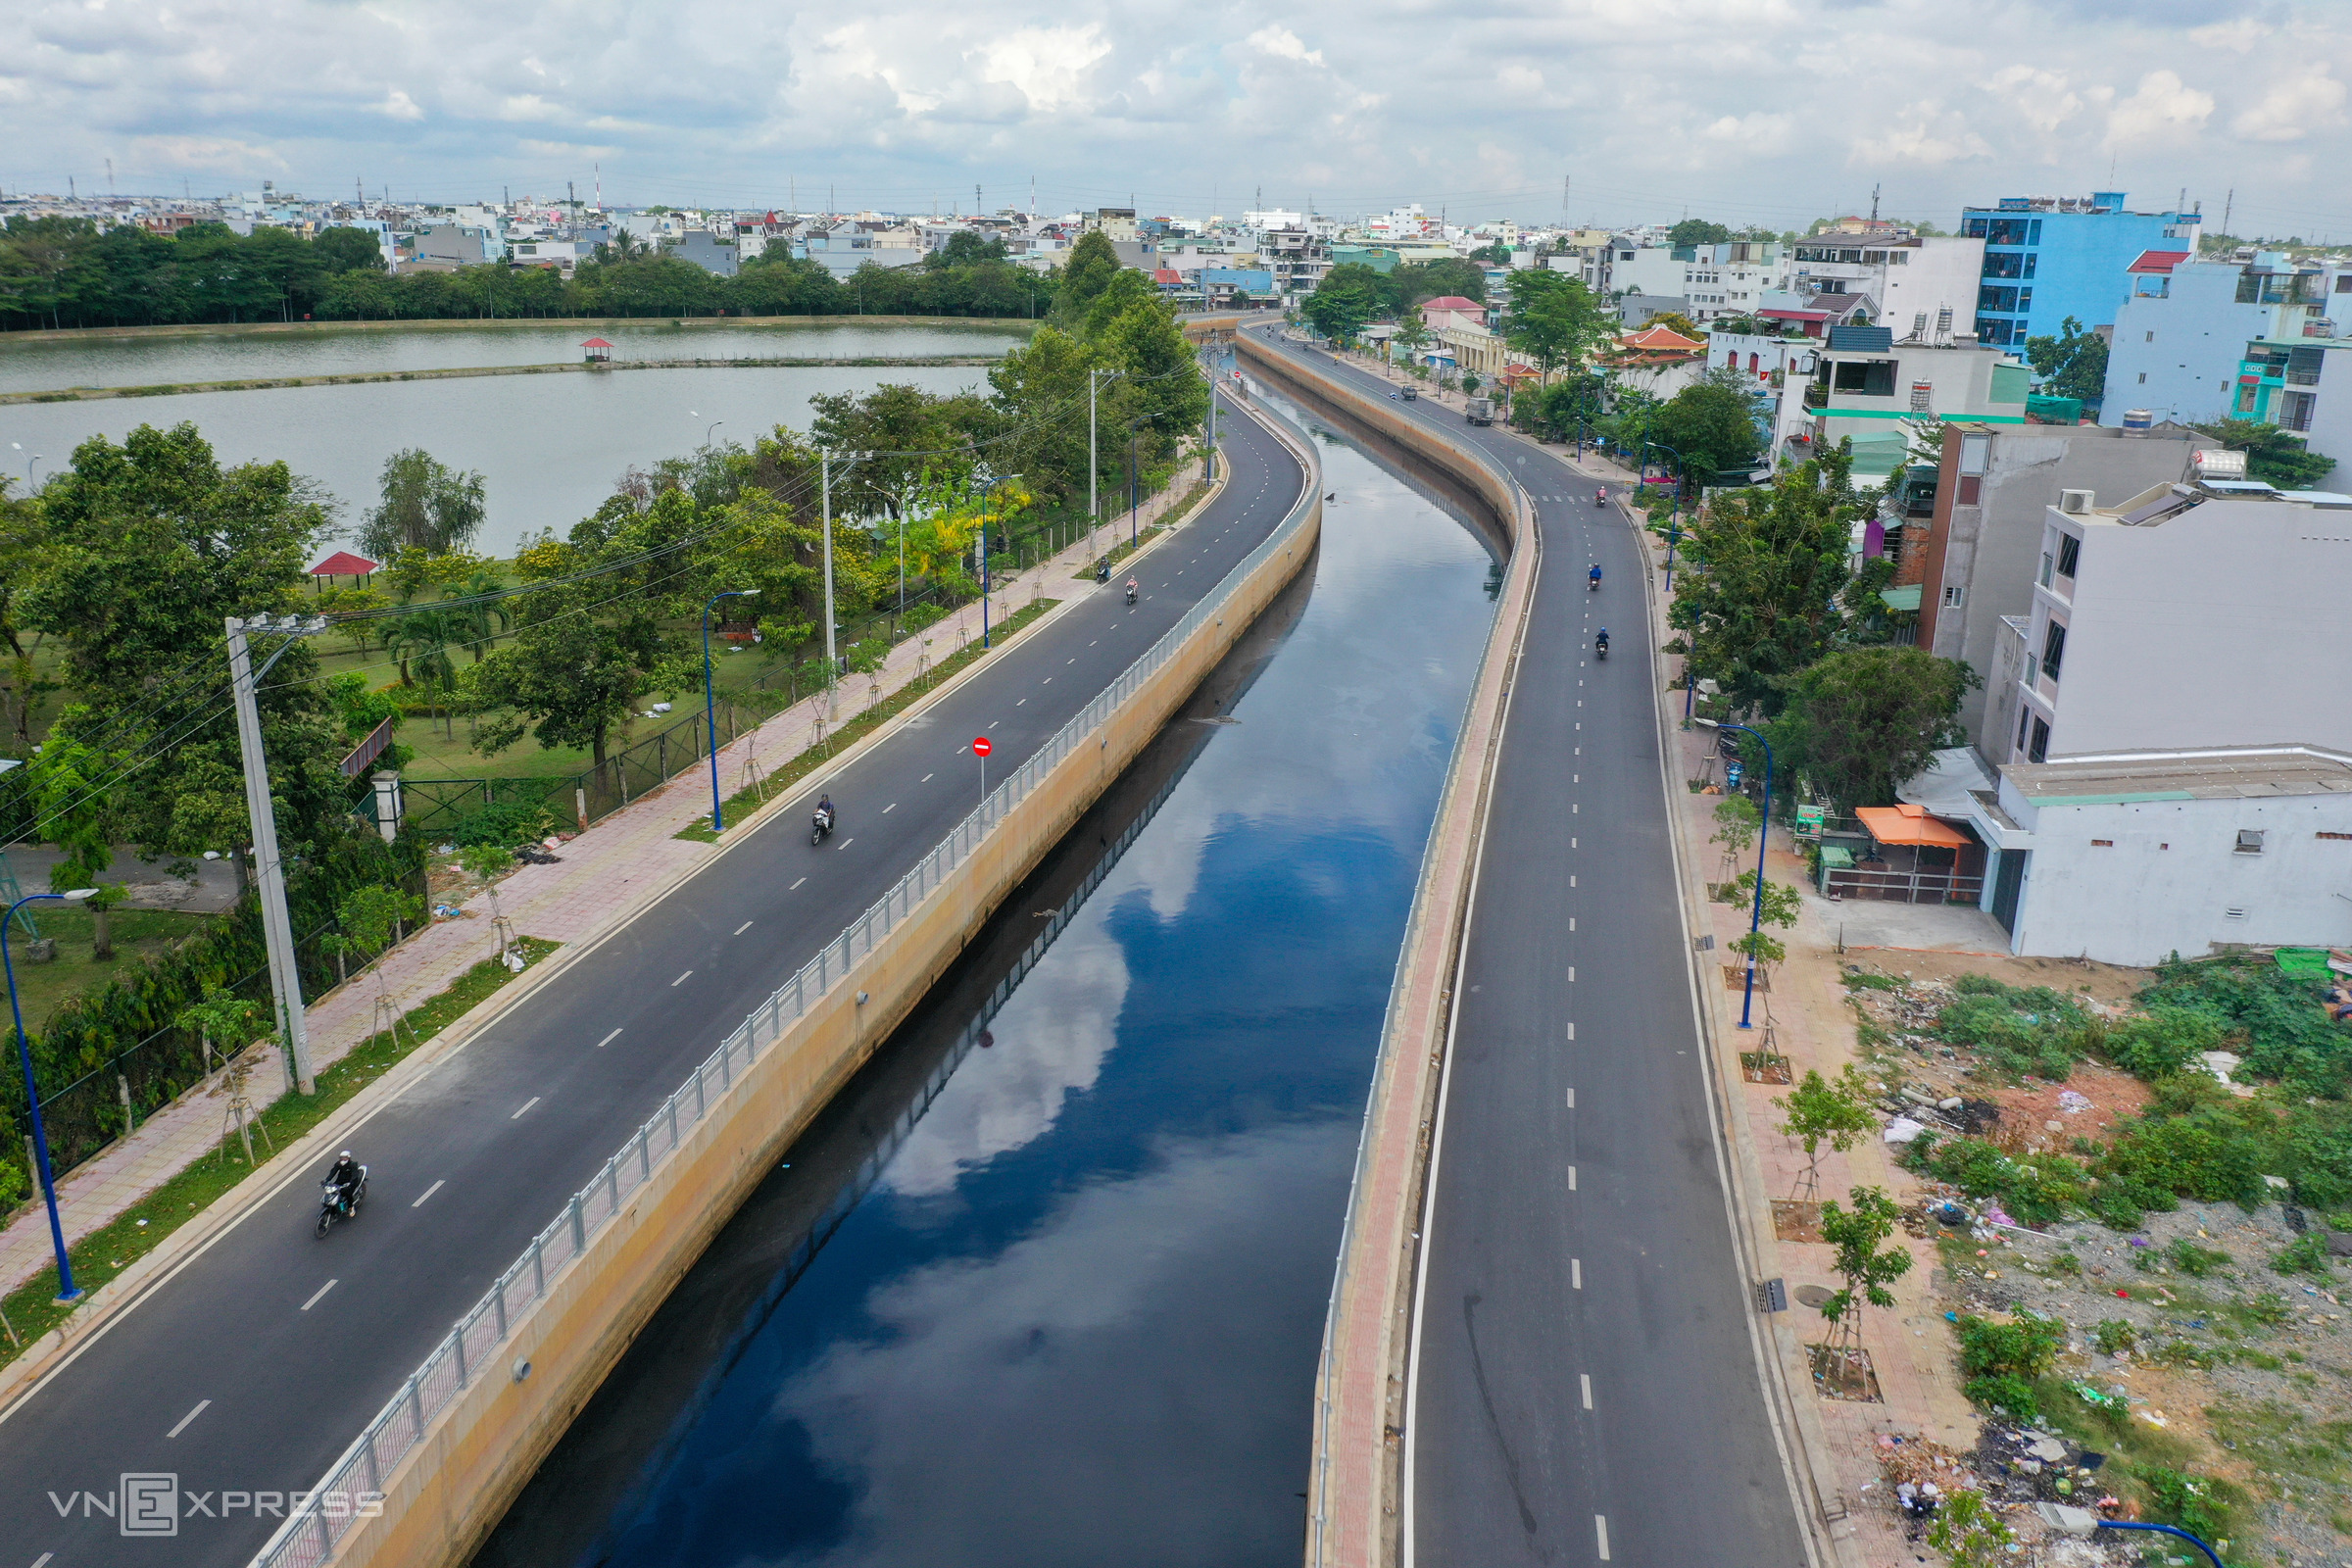 A section of Nuoc Den Canal in Binh Hung Hoa Ward of Binh Tan District in March 2022.In April 2020, a project was launched to dredge the canal and upgrade roads and bridges along the waterway.